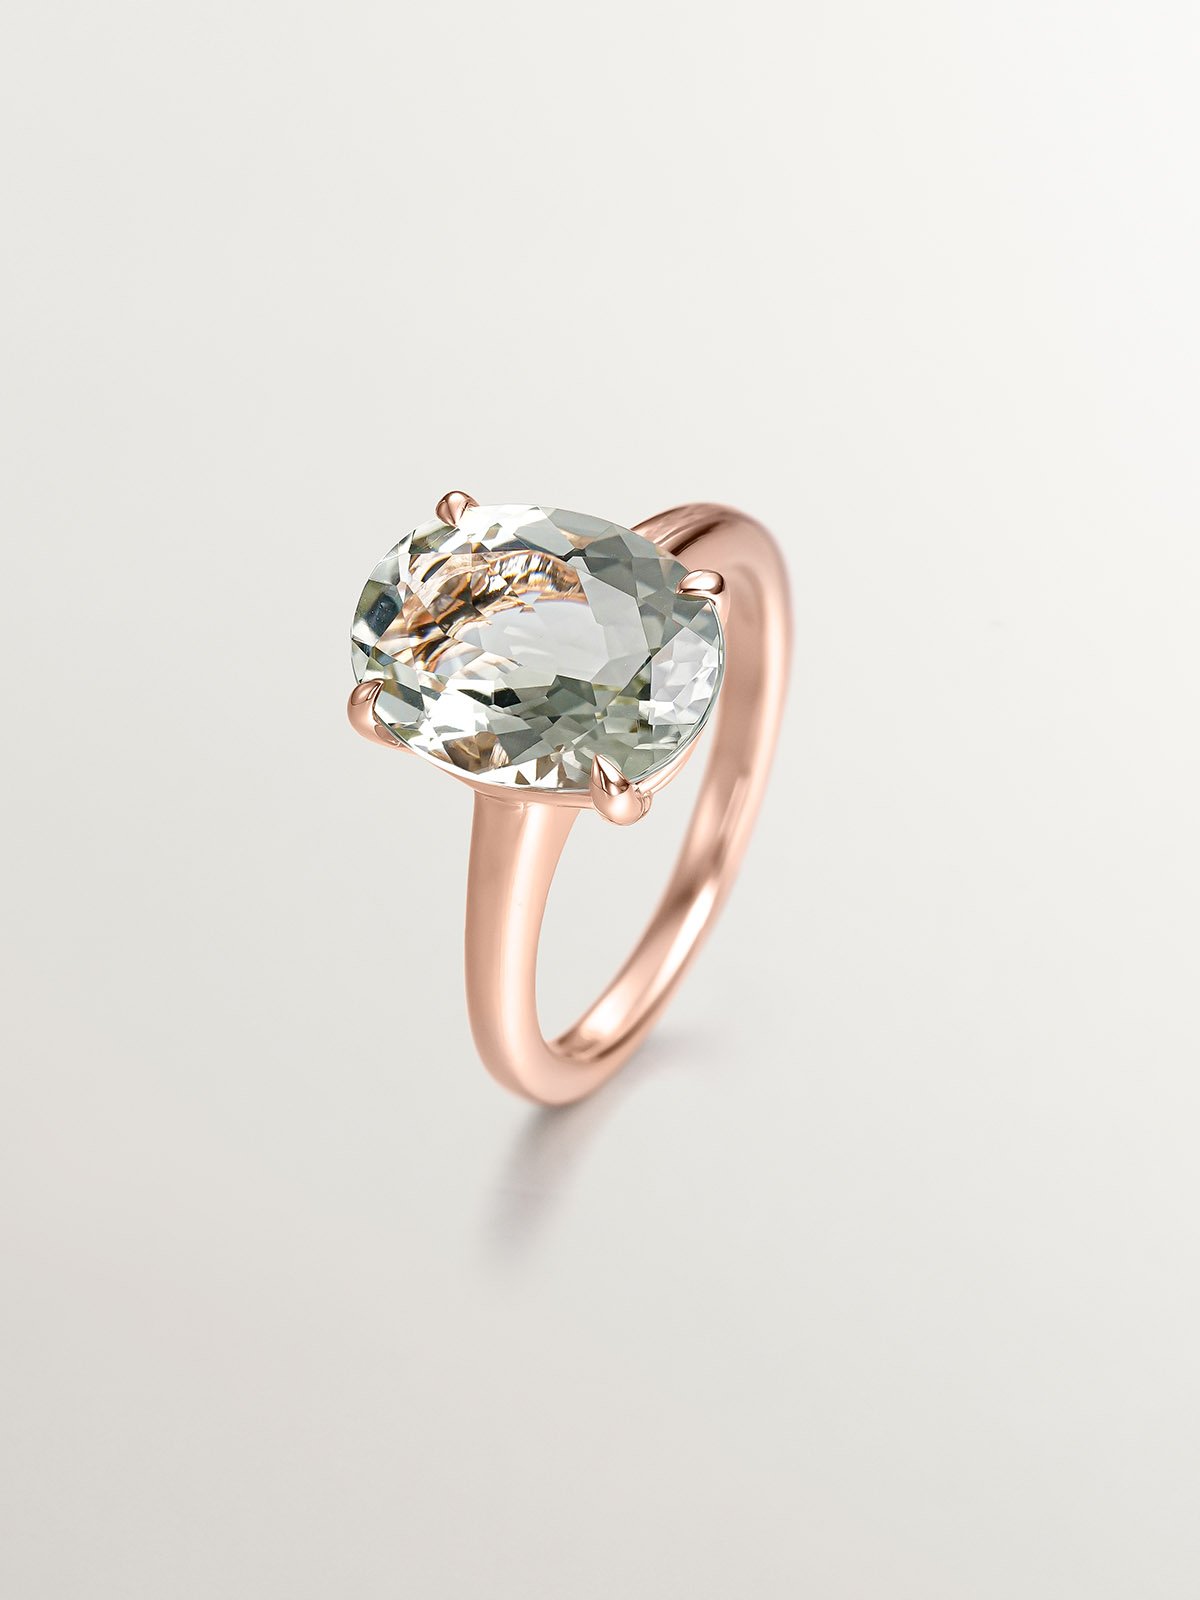 925 Silver ring plated in 18K rose gold with green quartz